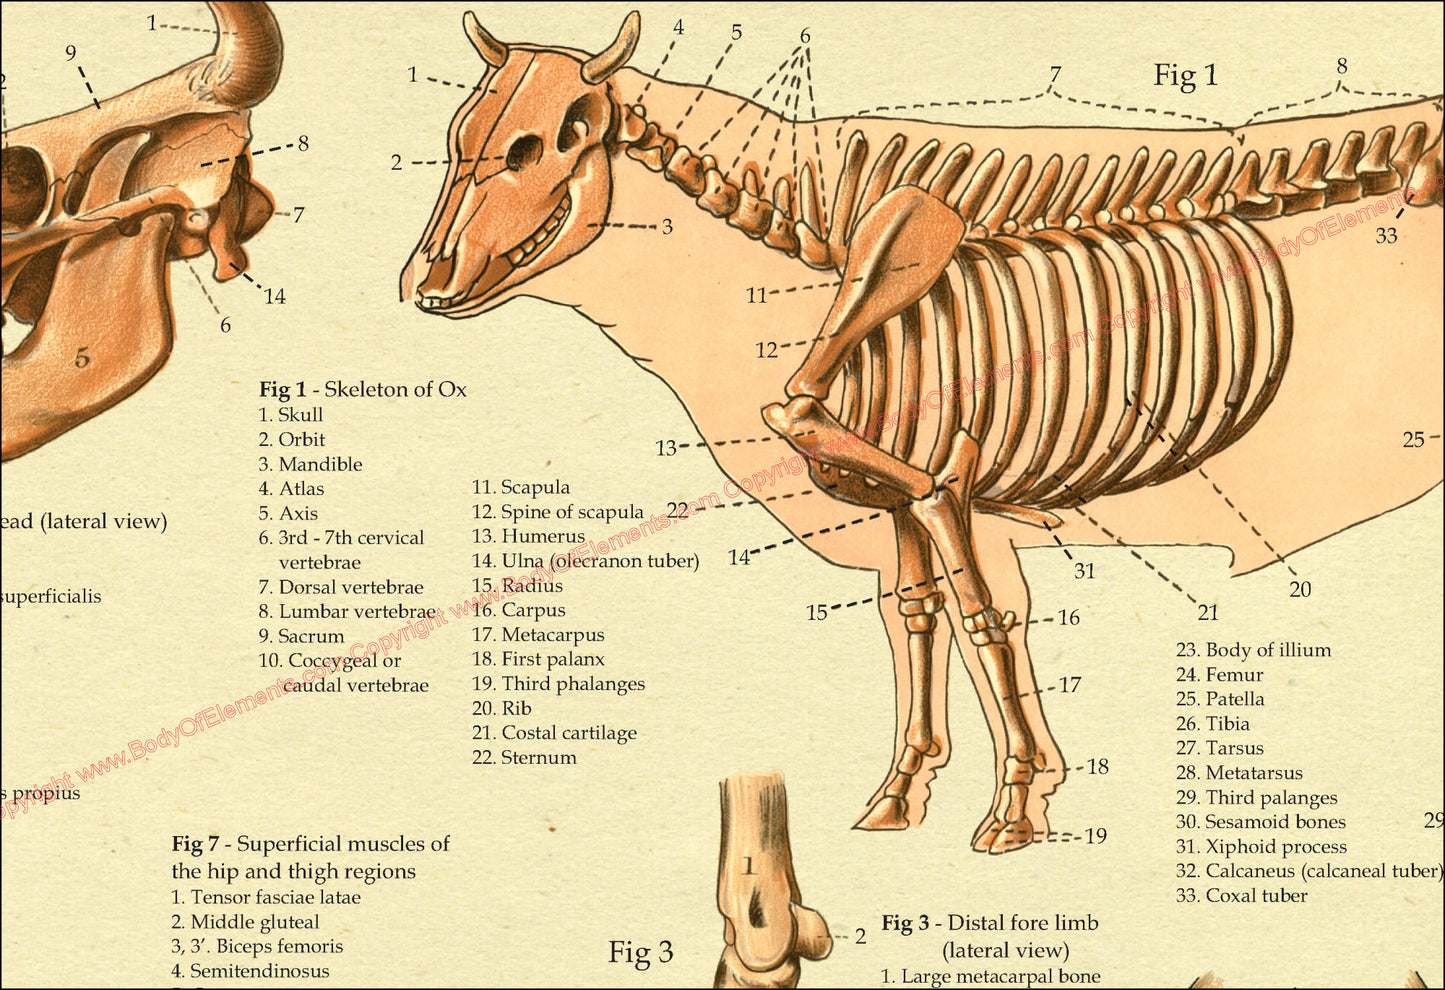 Skeletal anatomy of the cow